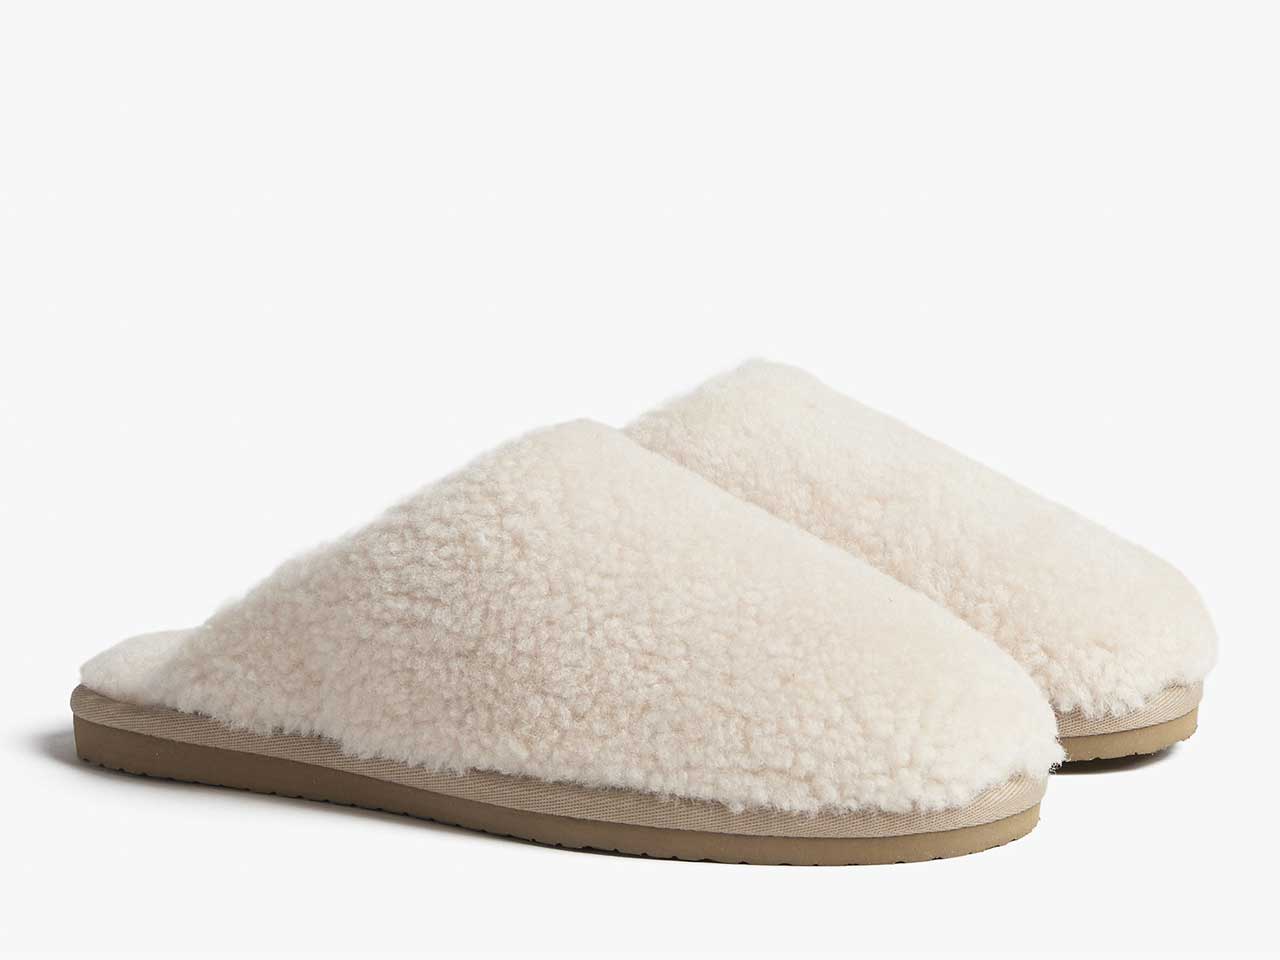 A pair of white shearling mules from Parachute.